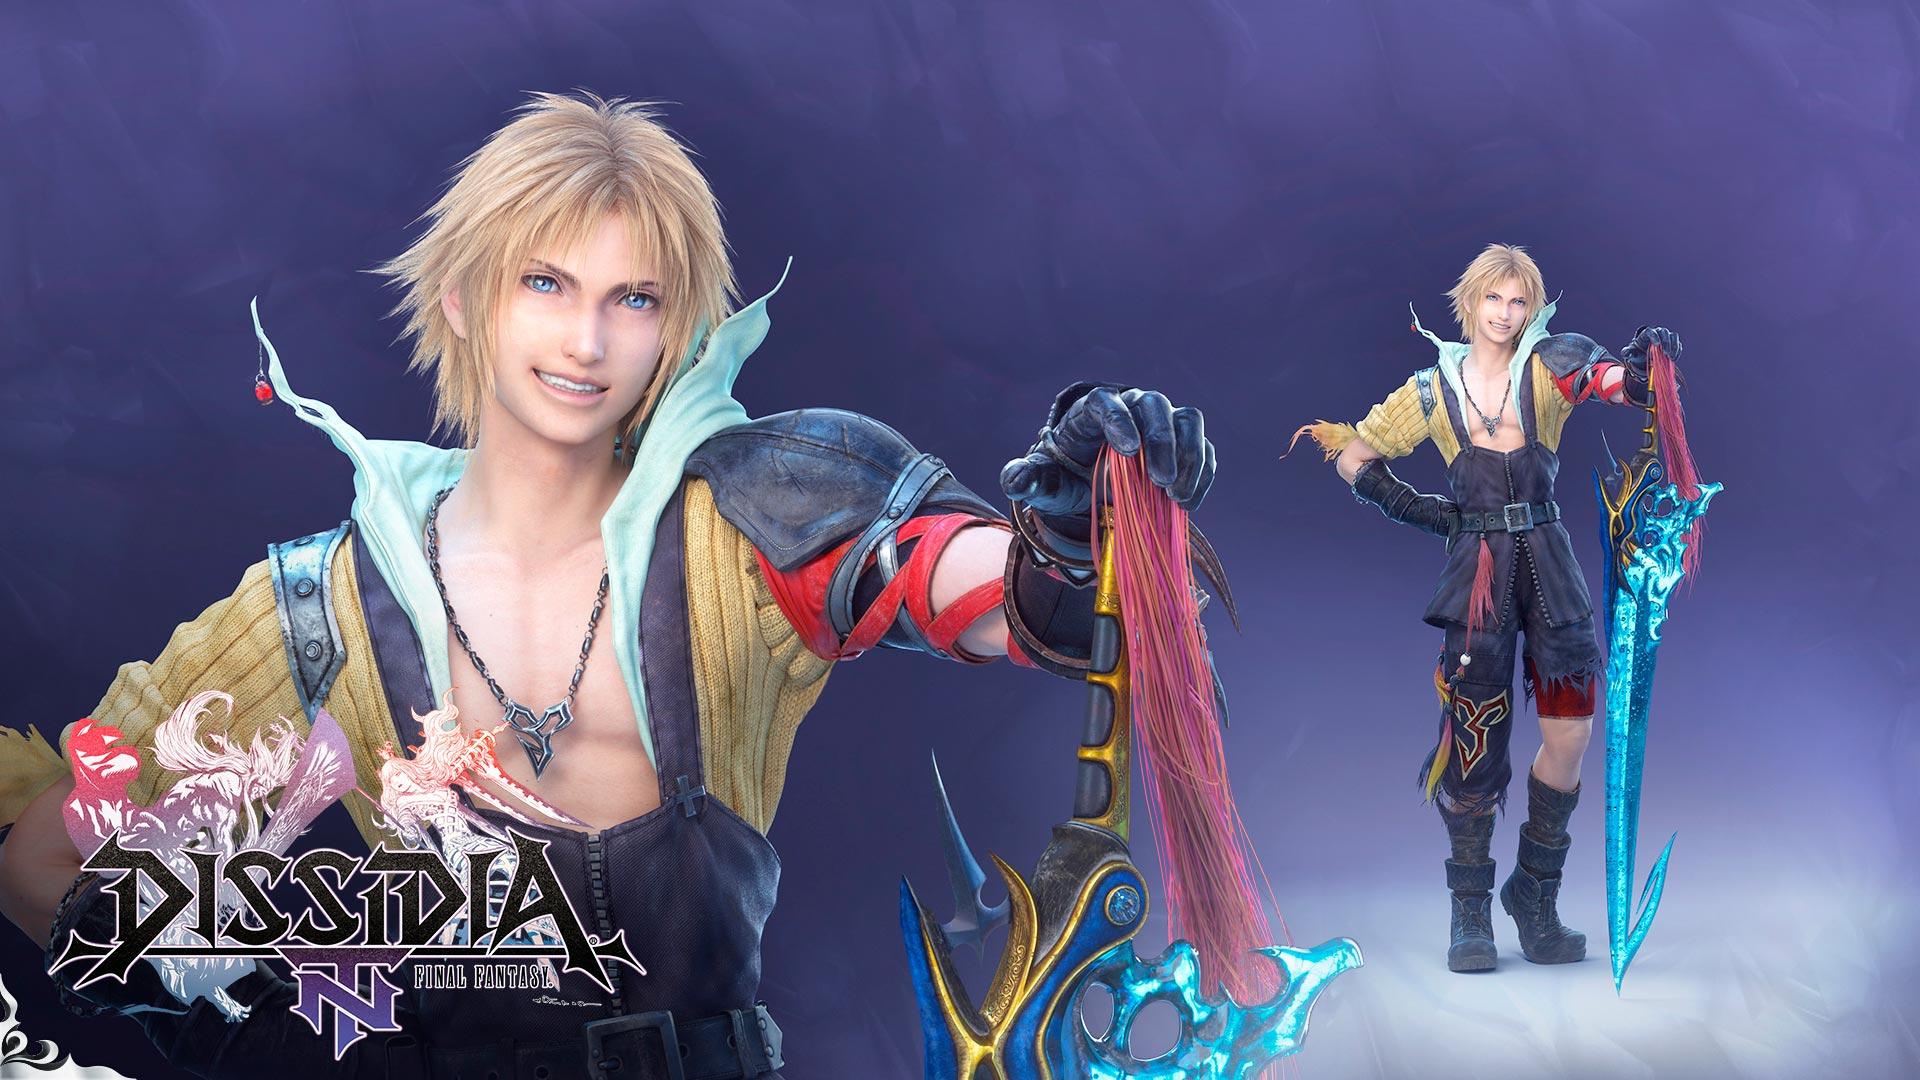 1920x1080 10+ Tidus (Final Fantasy) HD Wallpapers and Backgrounds